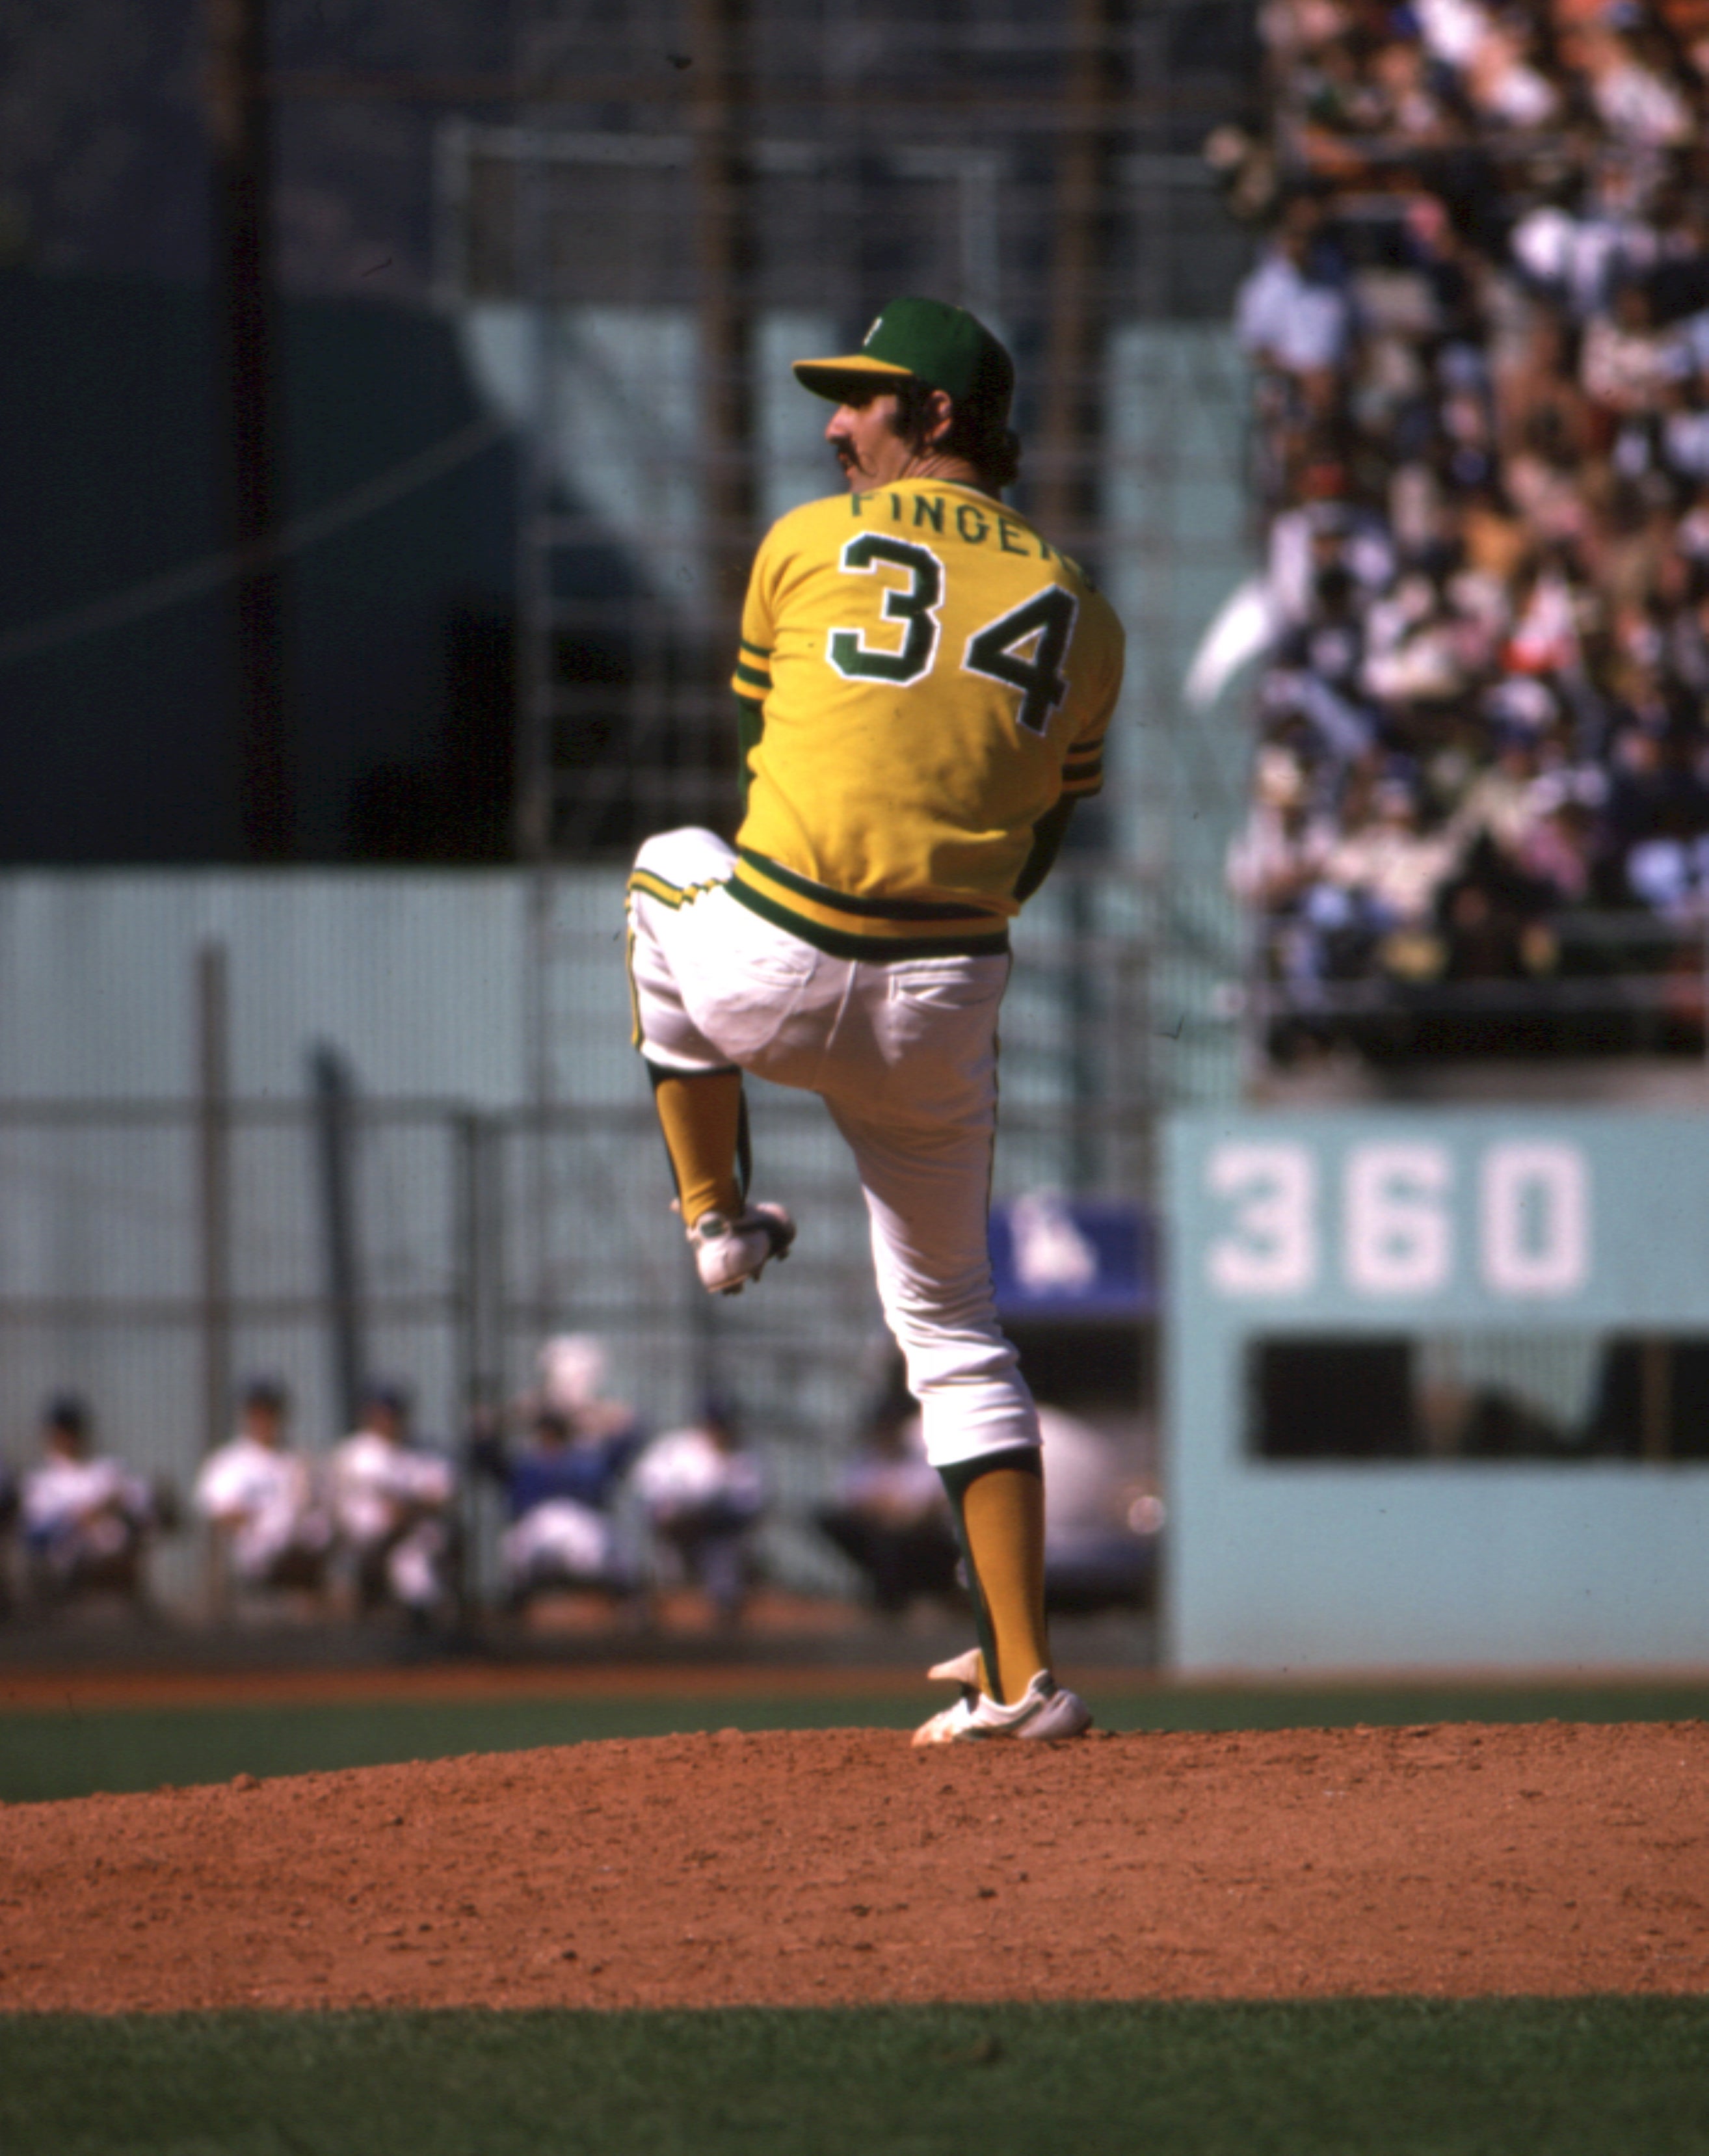 Fingers wraps up A’s dynasty with 1974 World Series MVP